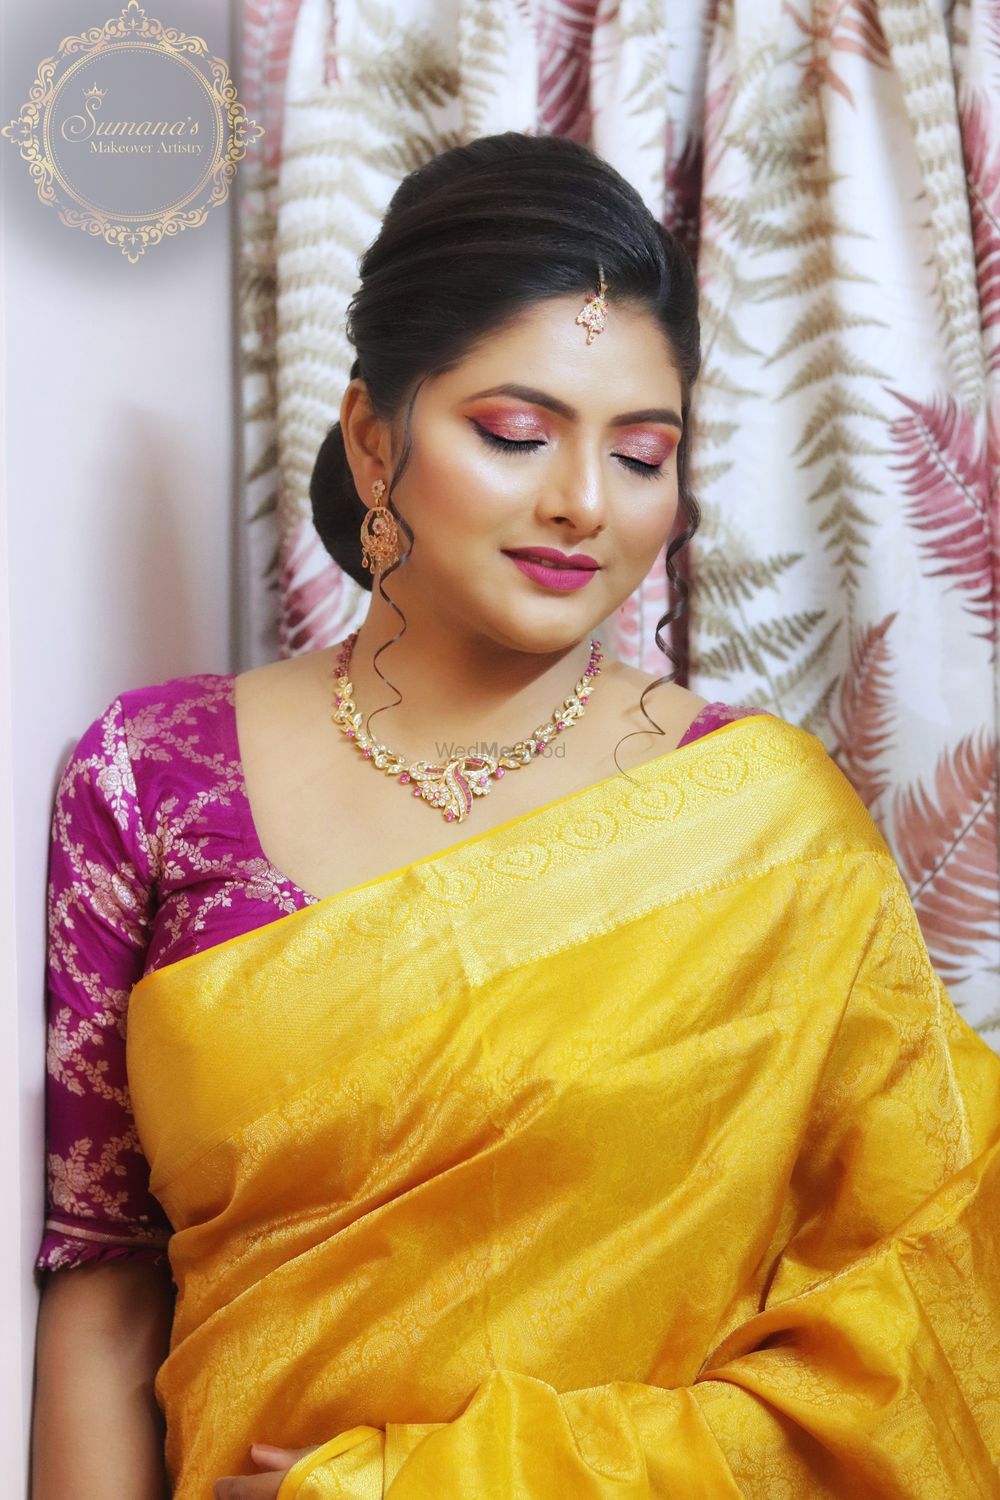 Photo From MAKEOVERS - By Sumana's Makeover Artistry